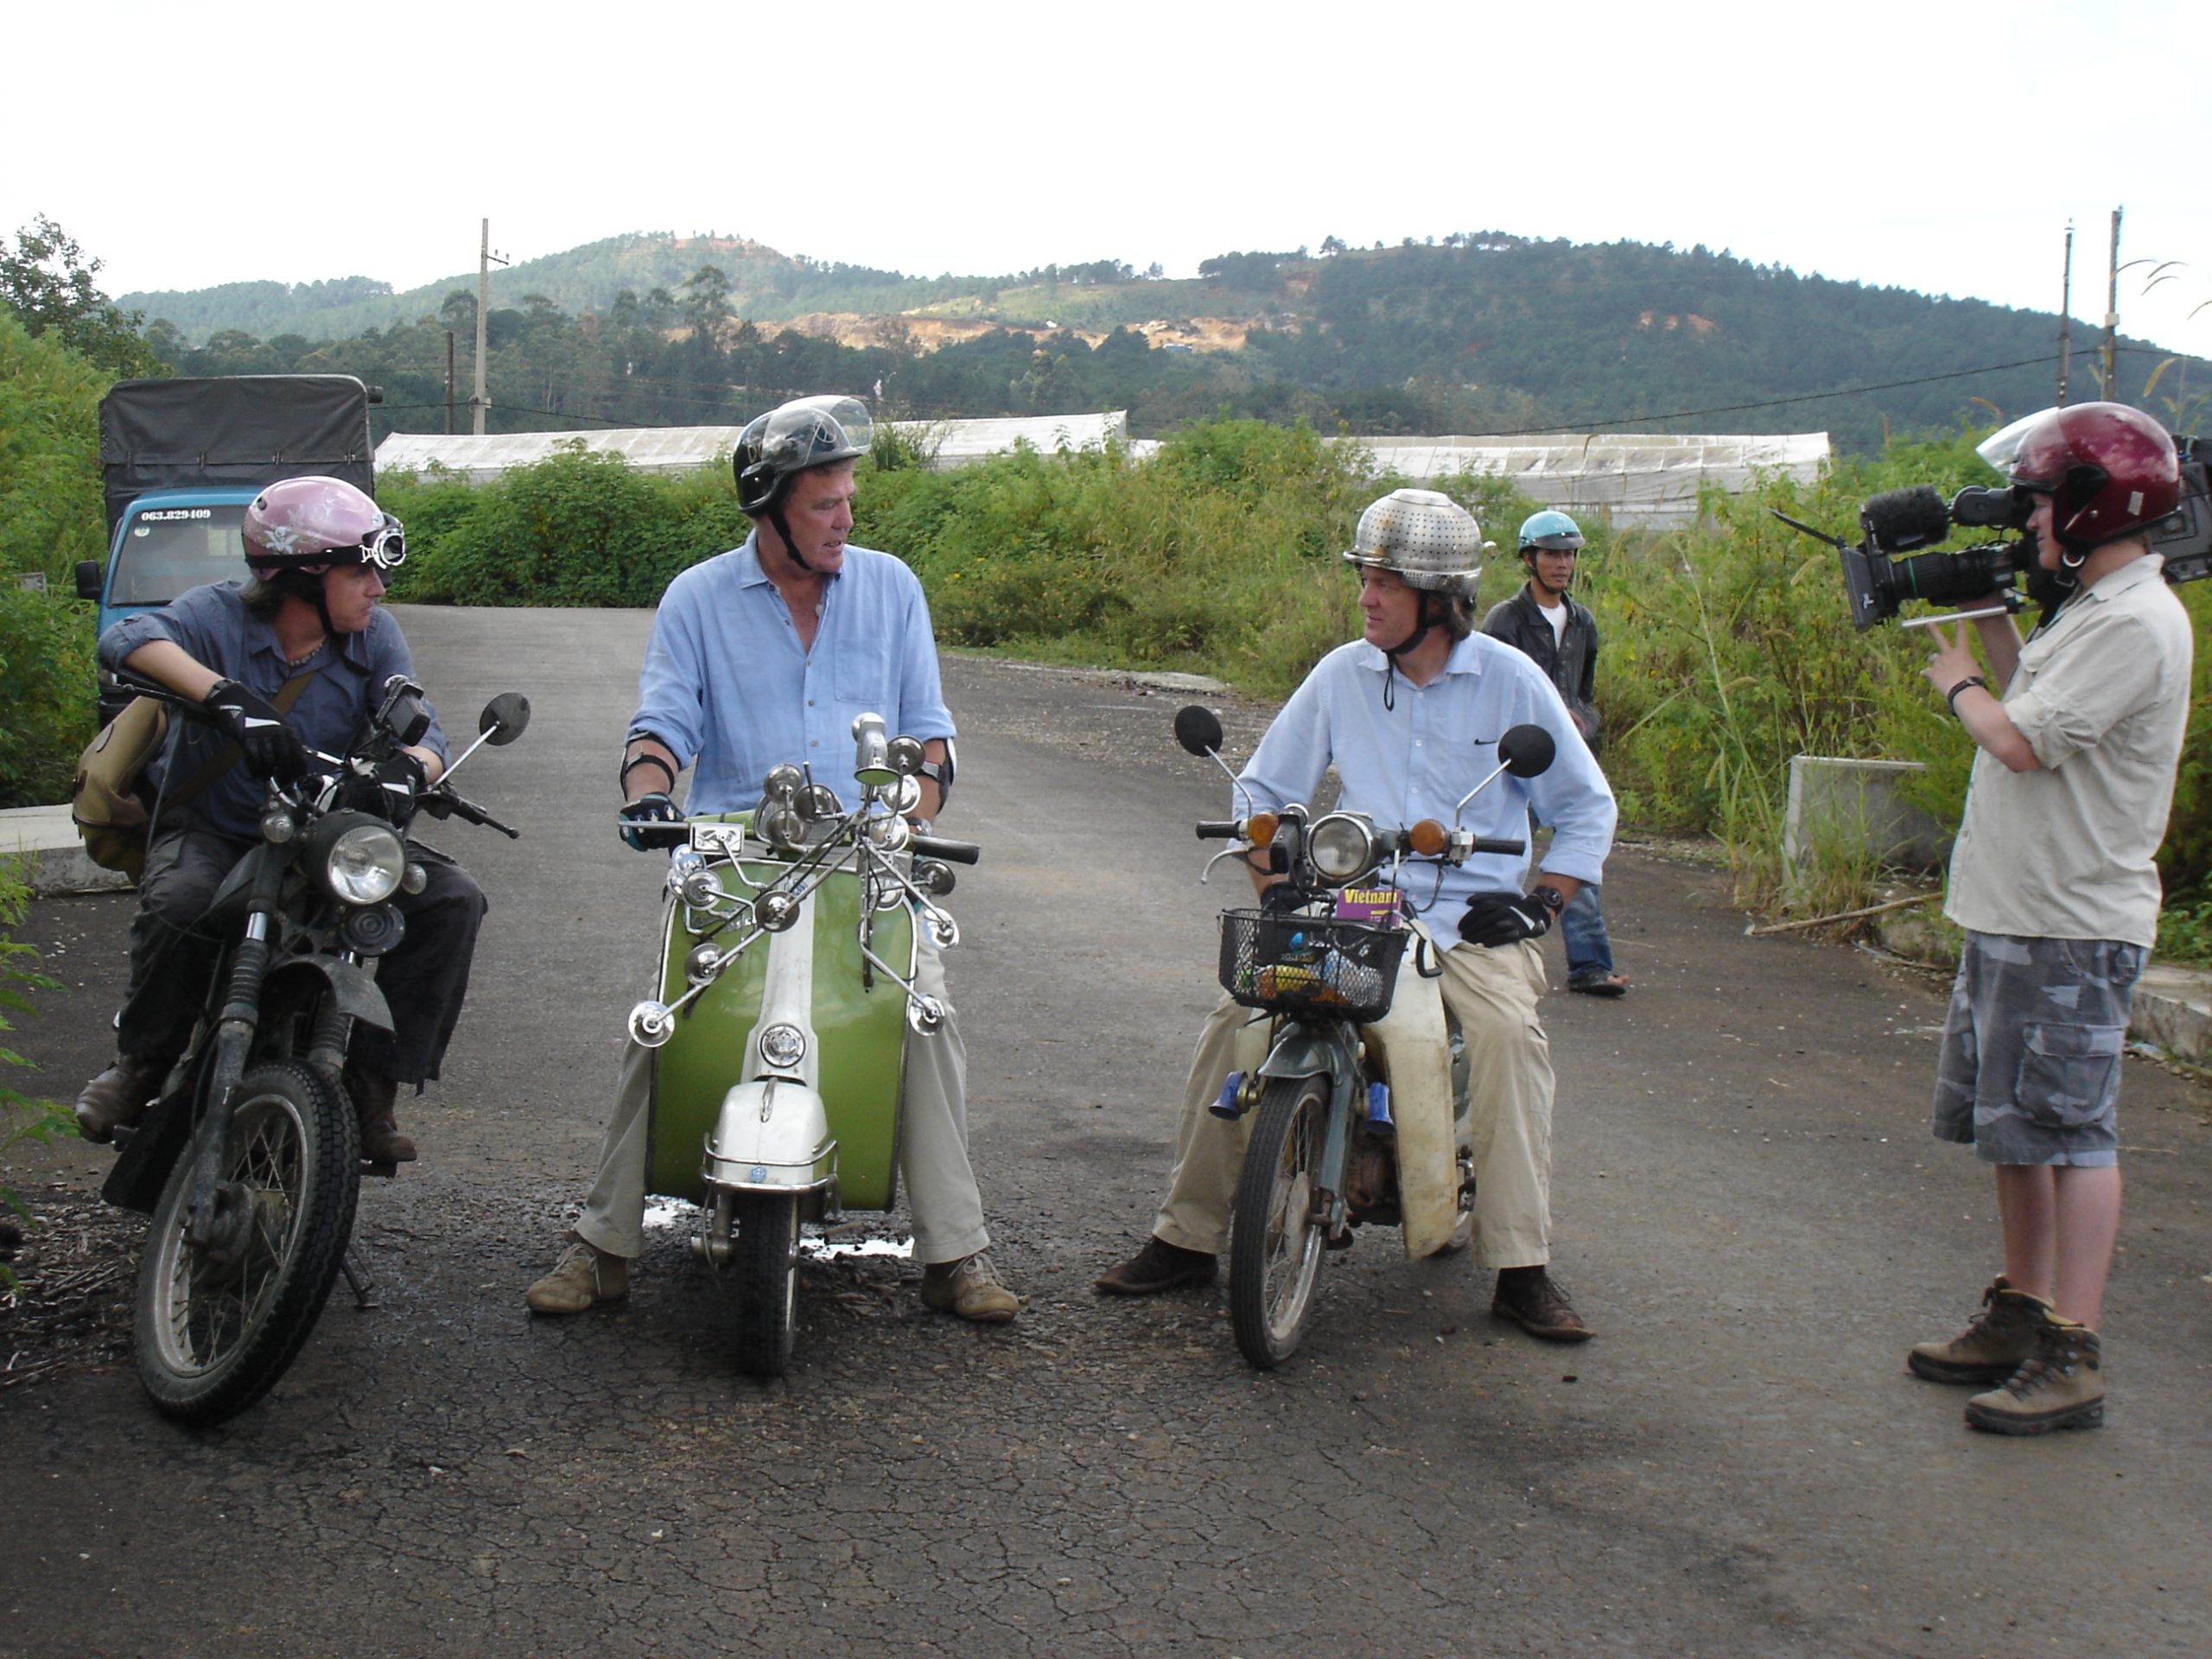 Jeremy Clarkson, James May and Richard Hammond in Vietnam for the Top Gear Vietnam Special